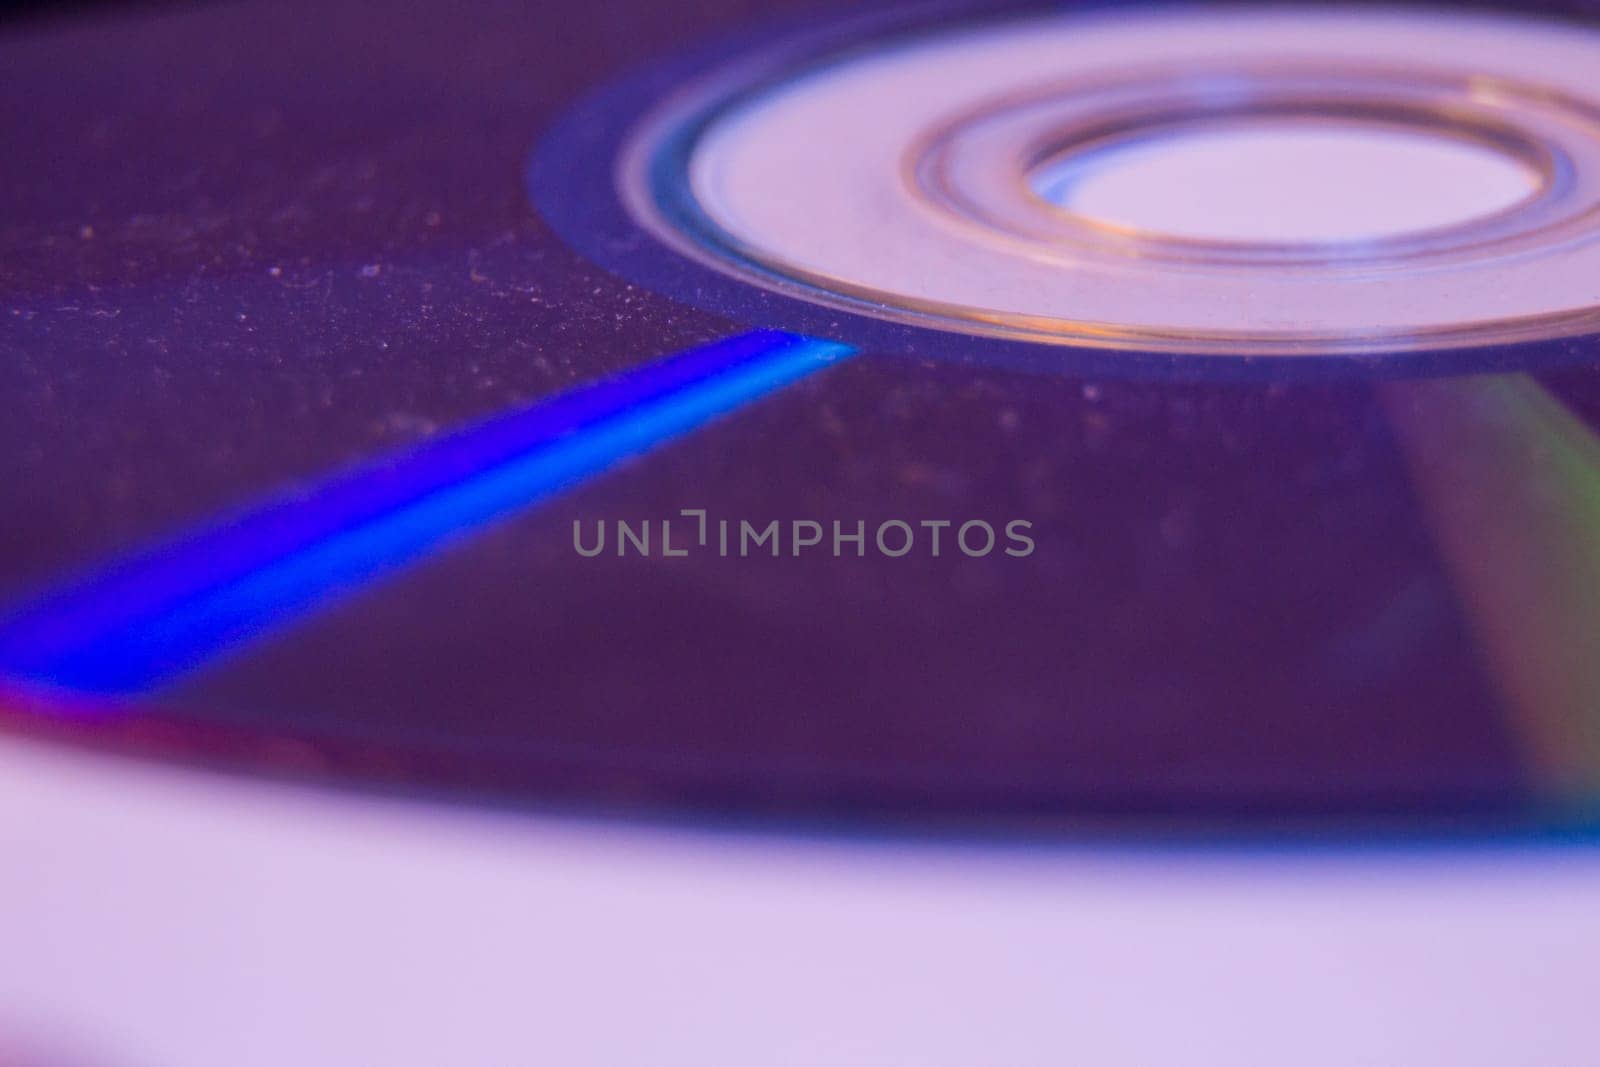 Macro closeup of Compact CD or DVD disc in violet color. by wavemovies